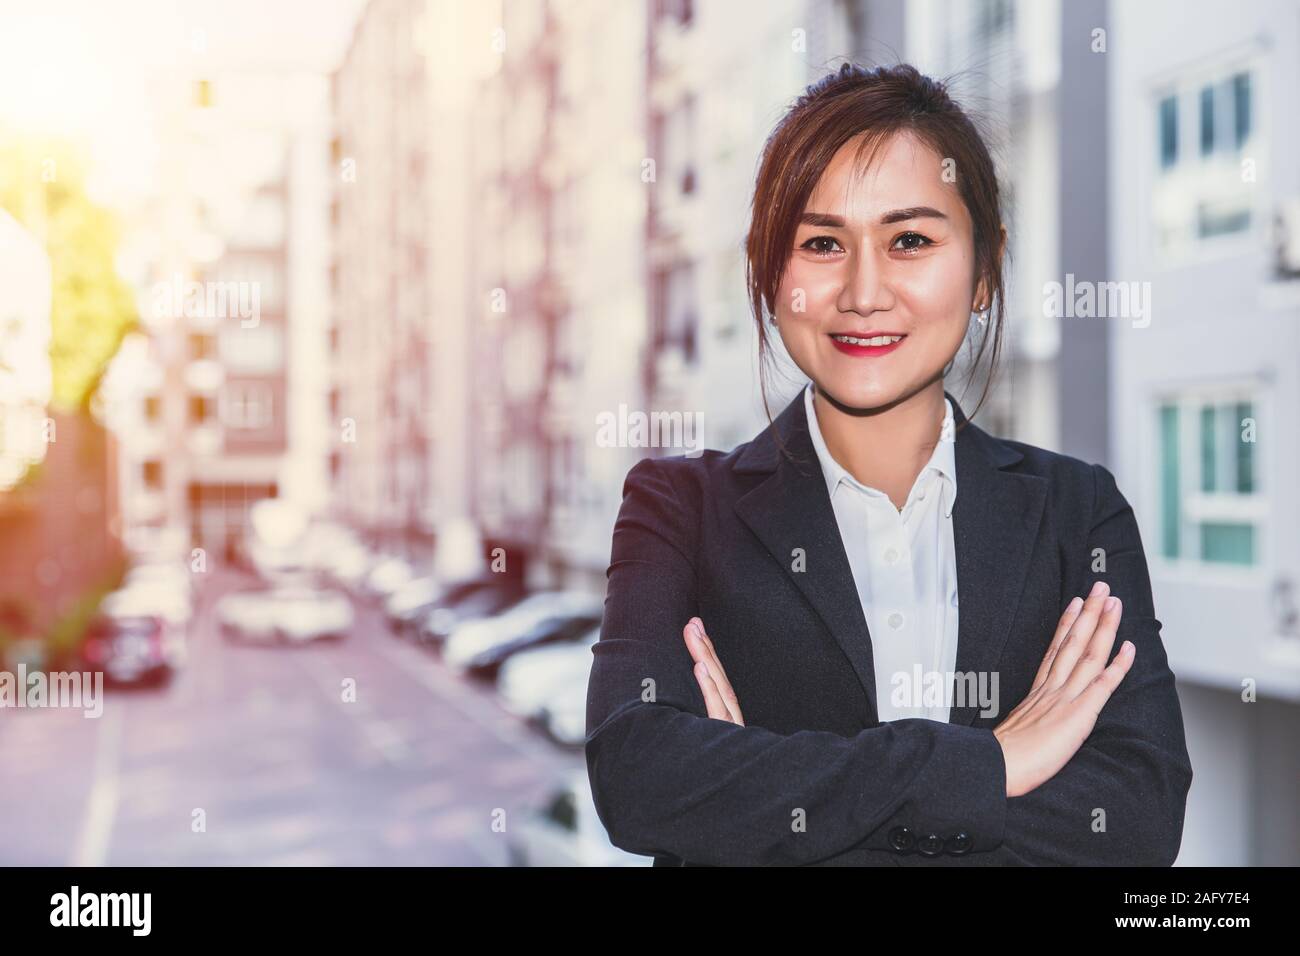 Real estate sale agency woman  portrait with condominium accommodation blur background for home asset business advertising. Stock Photo